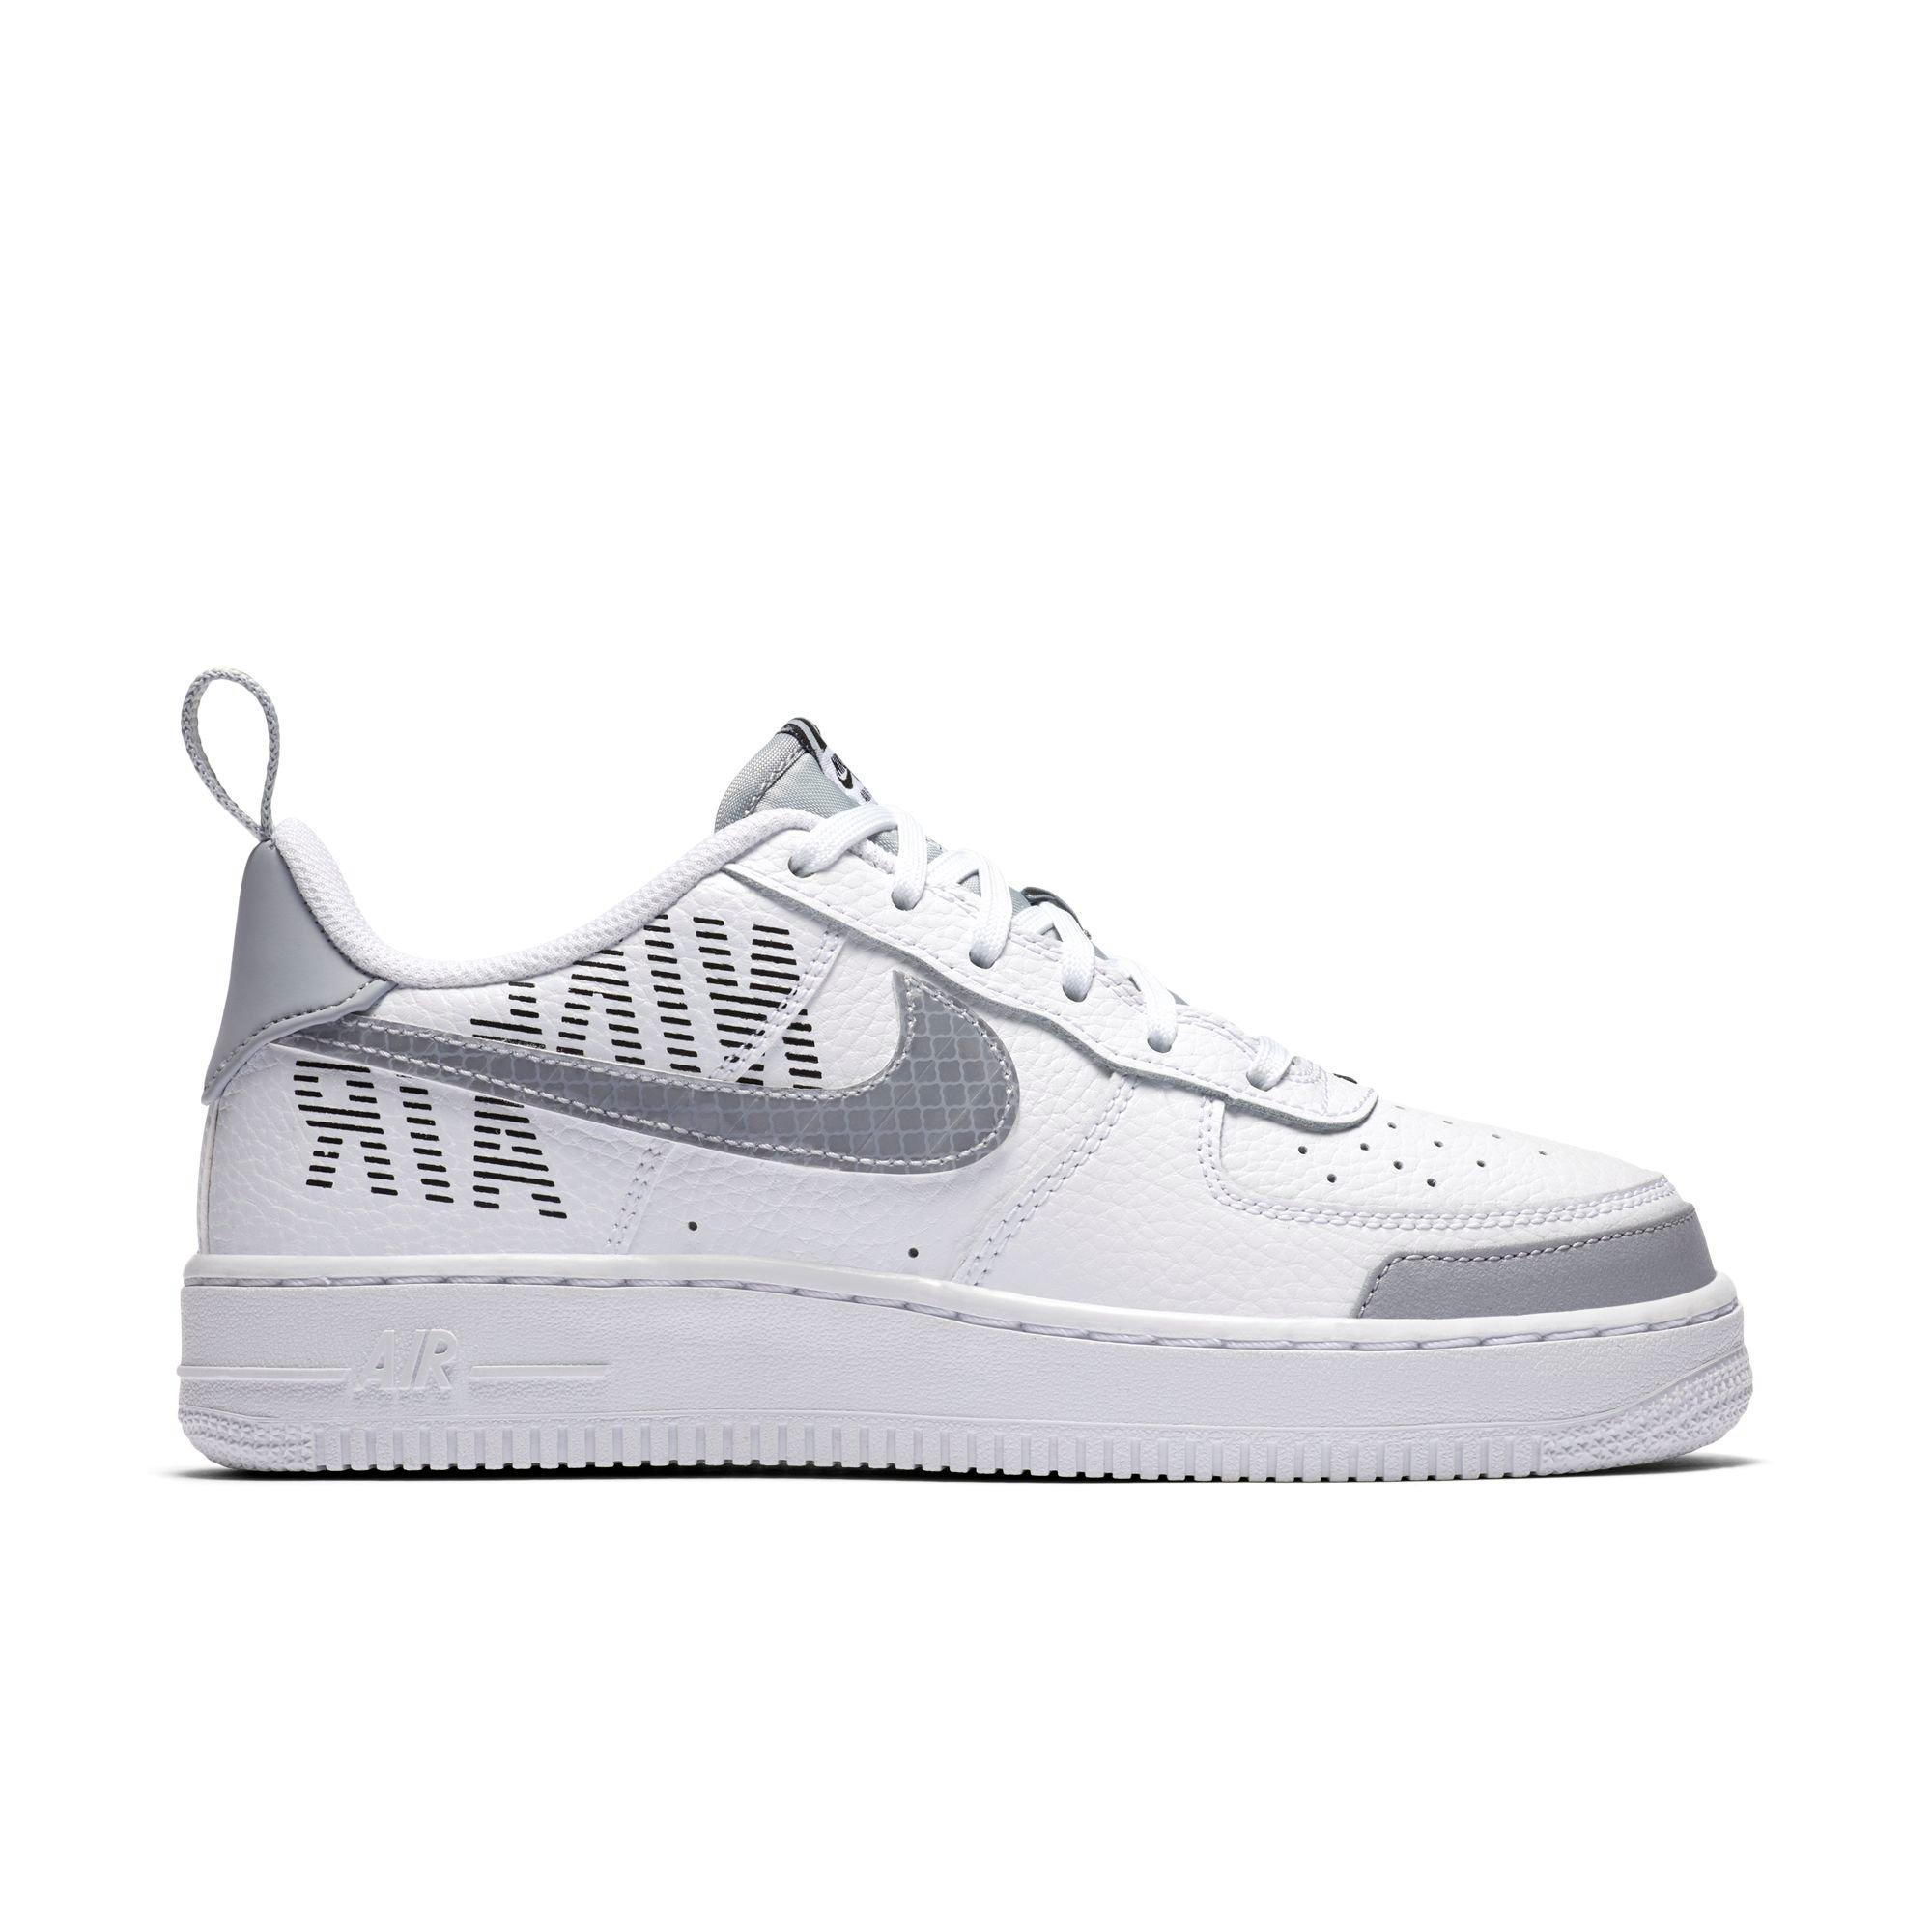 grey and white nike sneakers